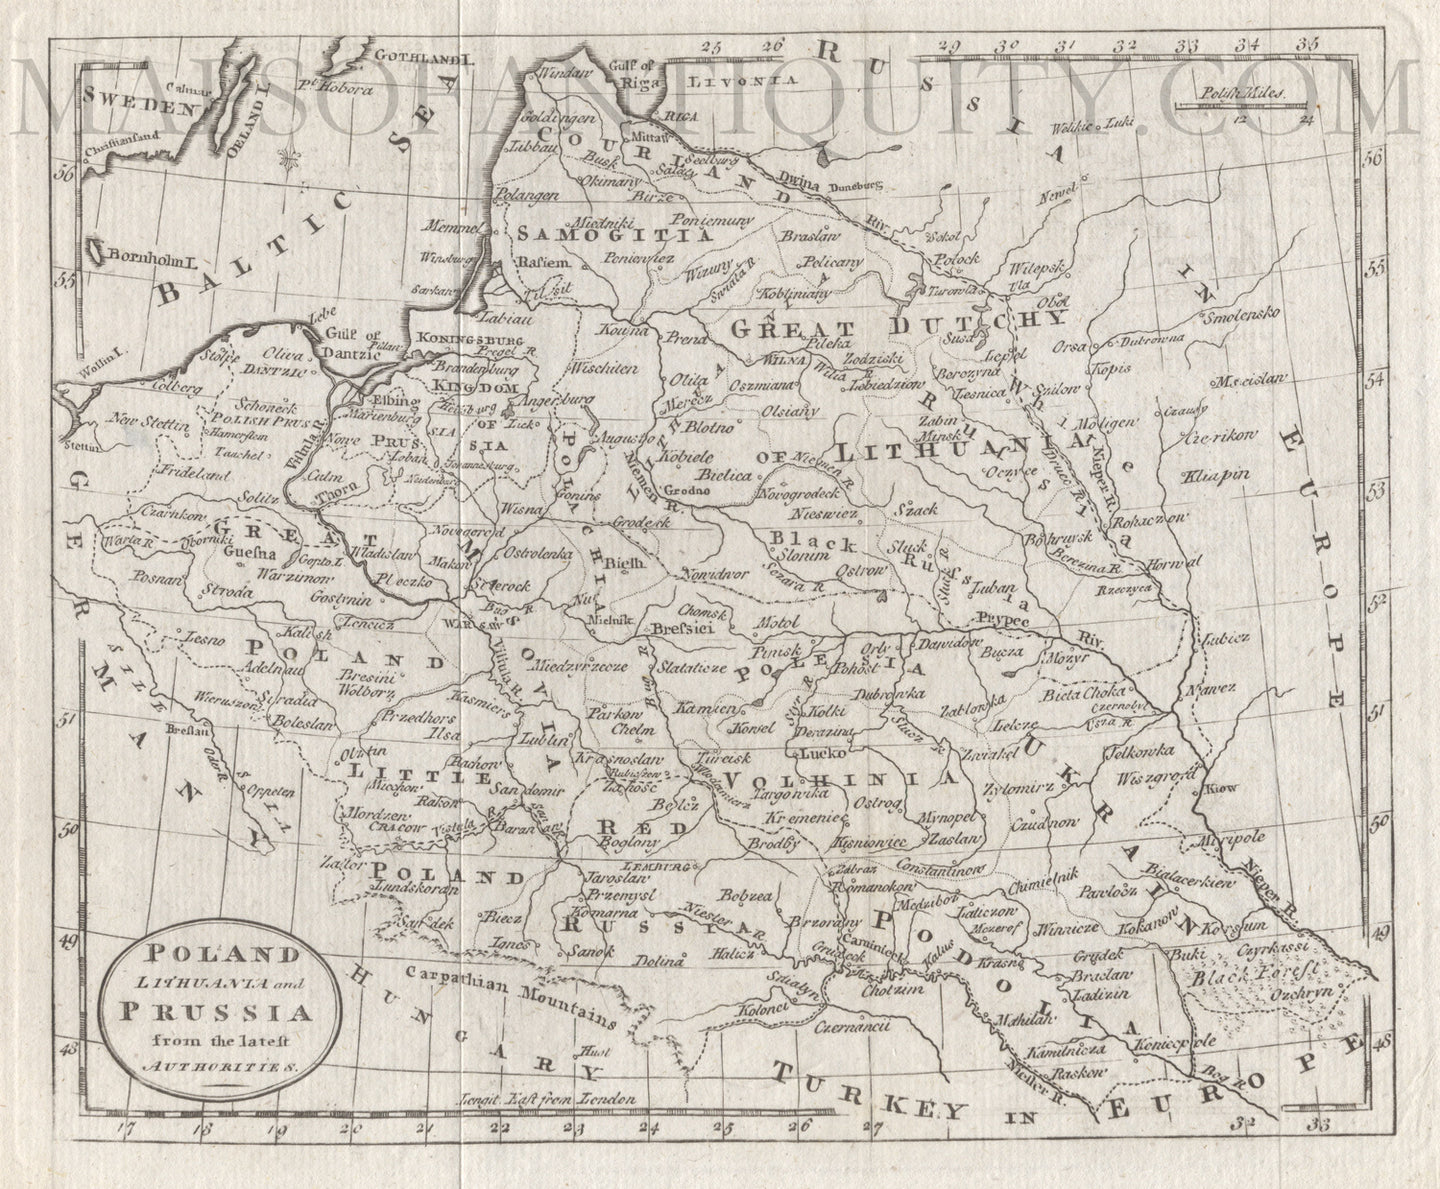 Black-and-white-antique-map-Poland-Lithuania-and-Prussia-from-the-Latest-Authorities-Europe-Poland-1787-Guthrie-Maps-Of-Antiquity